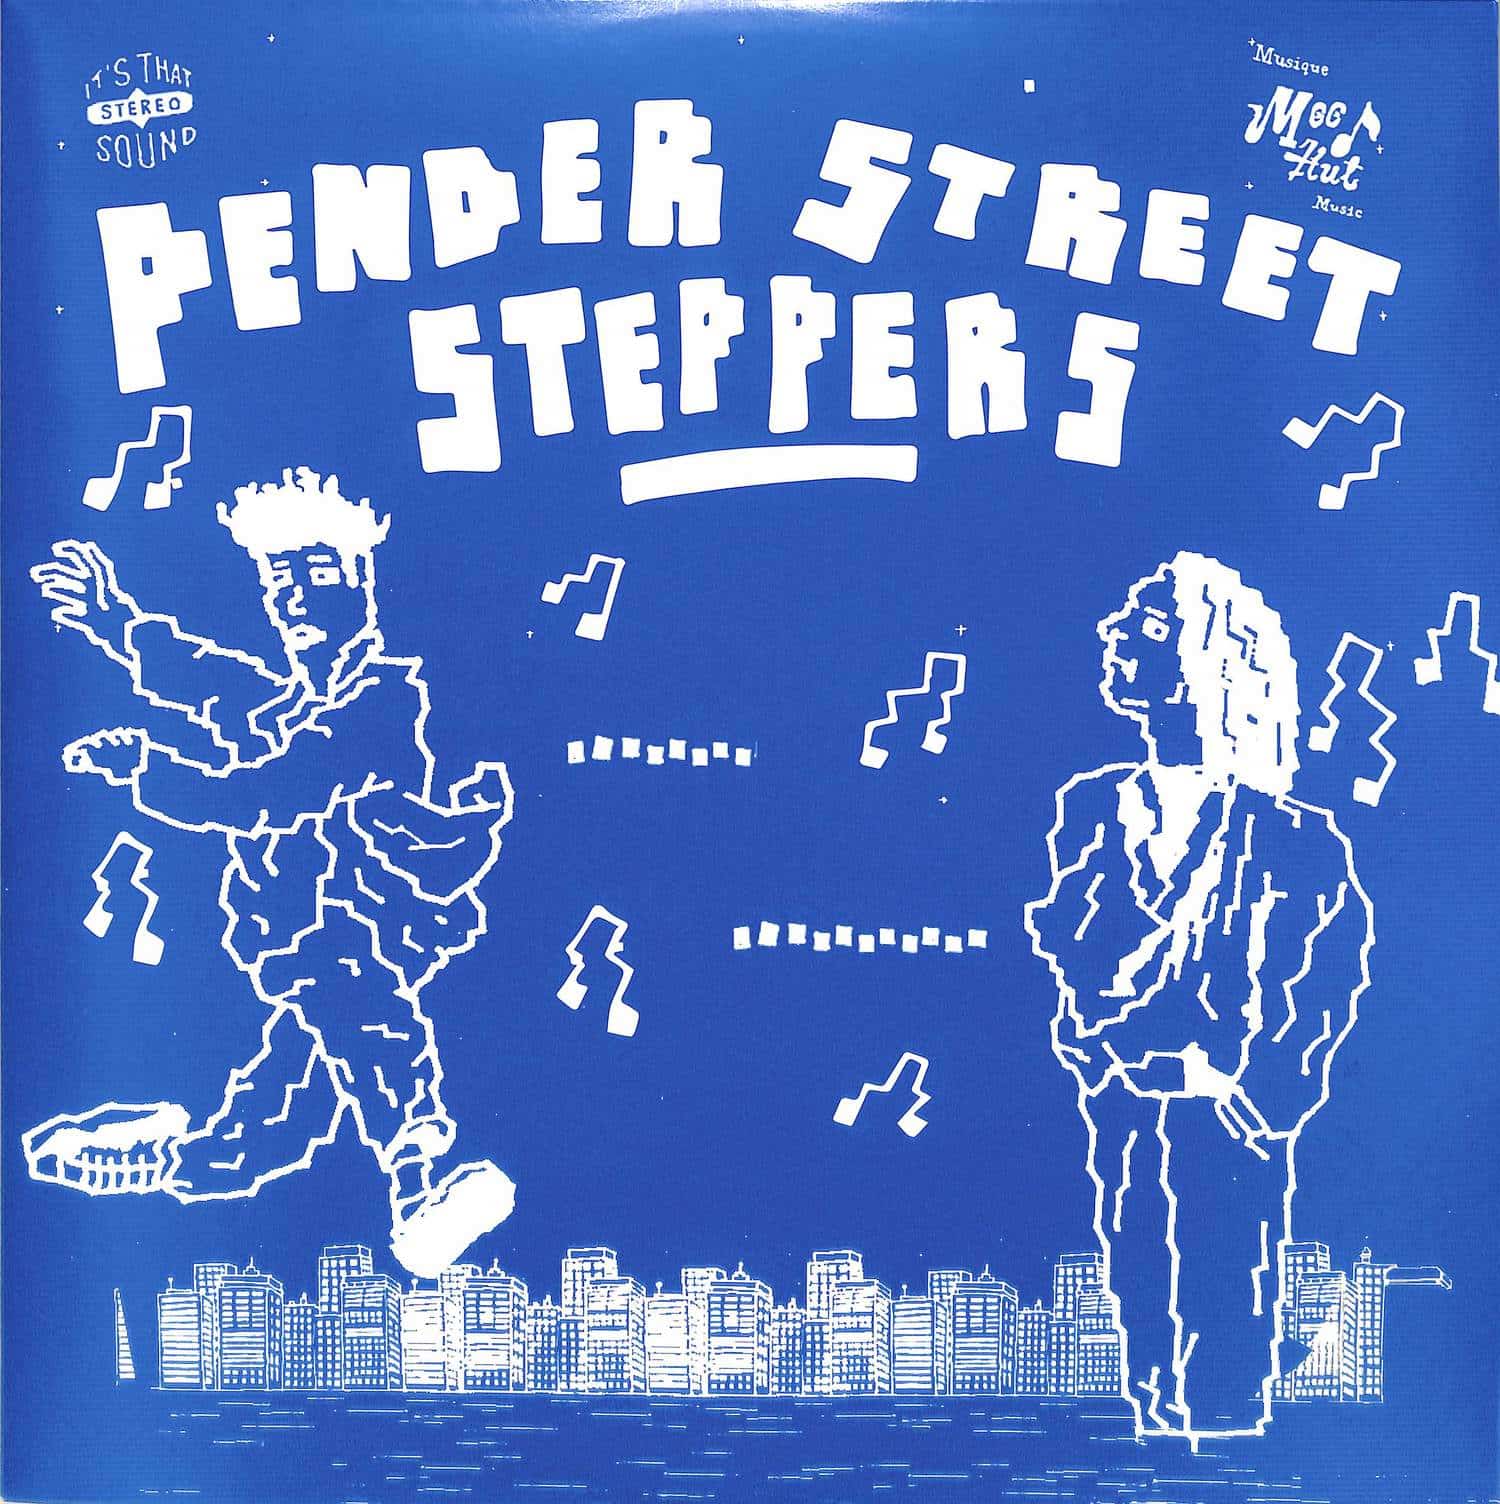 Pender Street Steppers - MH019